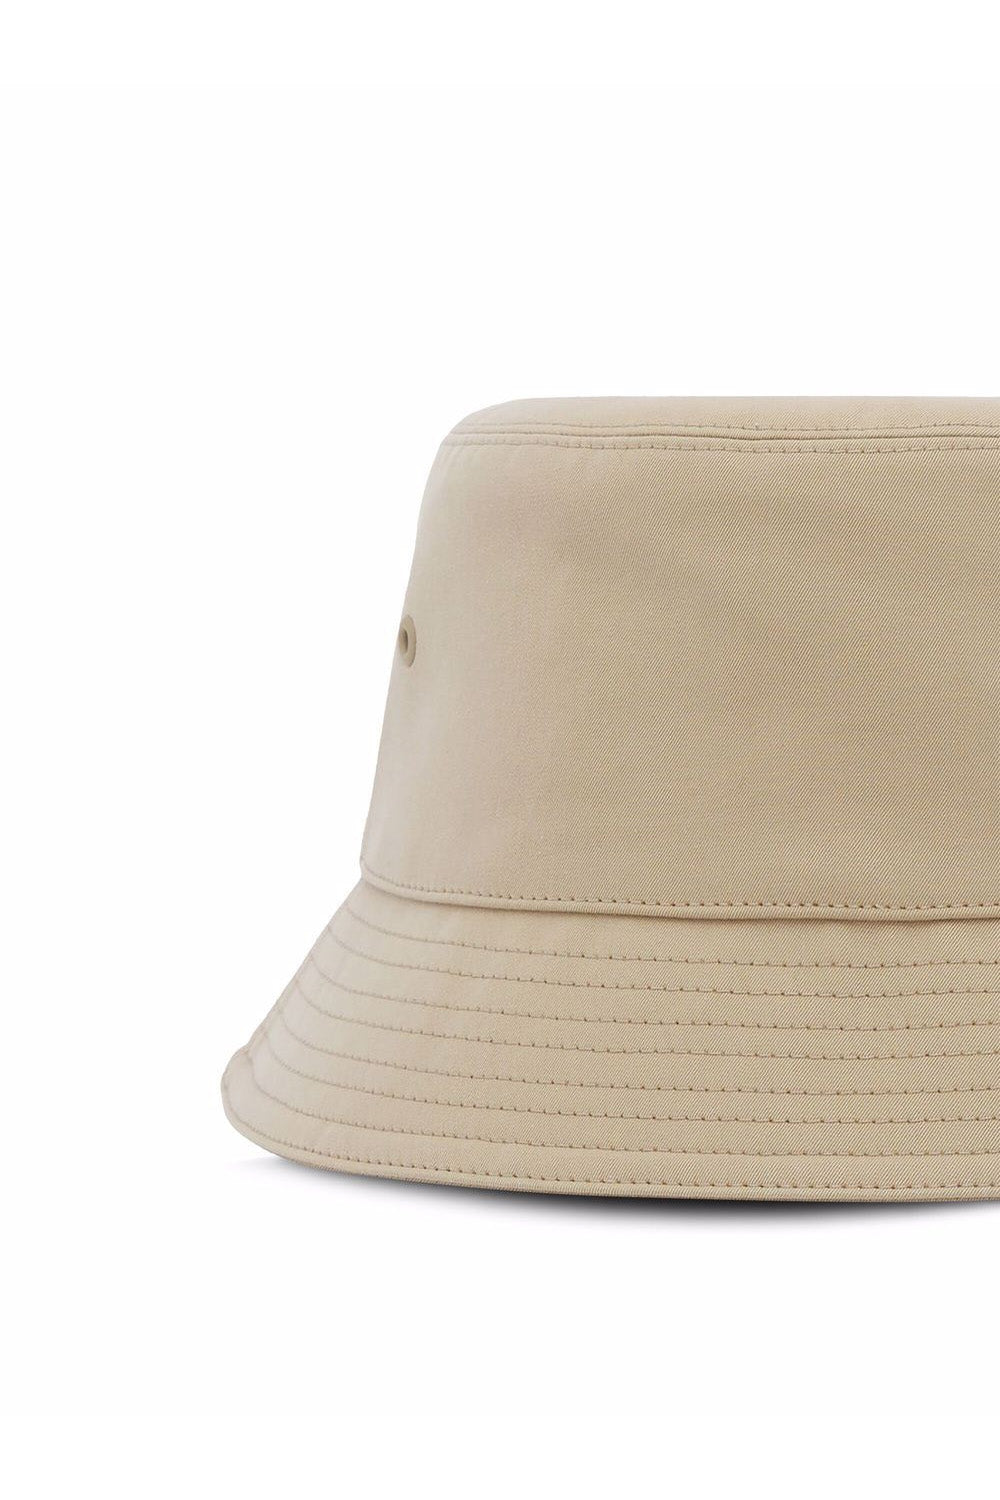 Burberry embroidered logo bucket hat